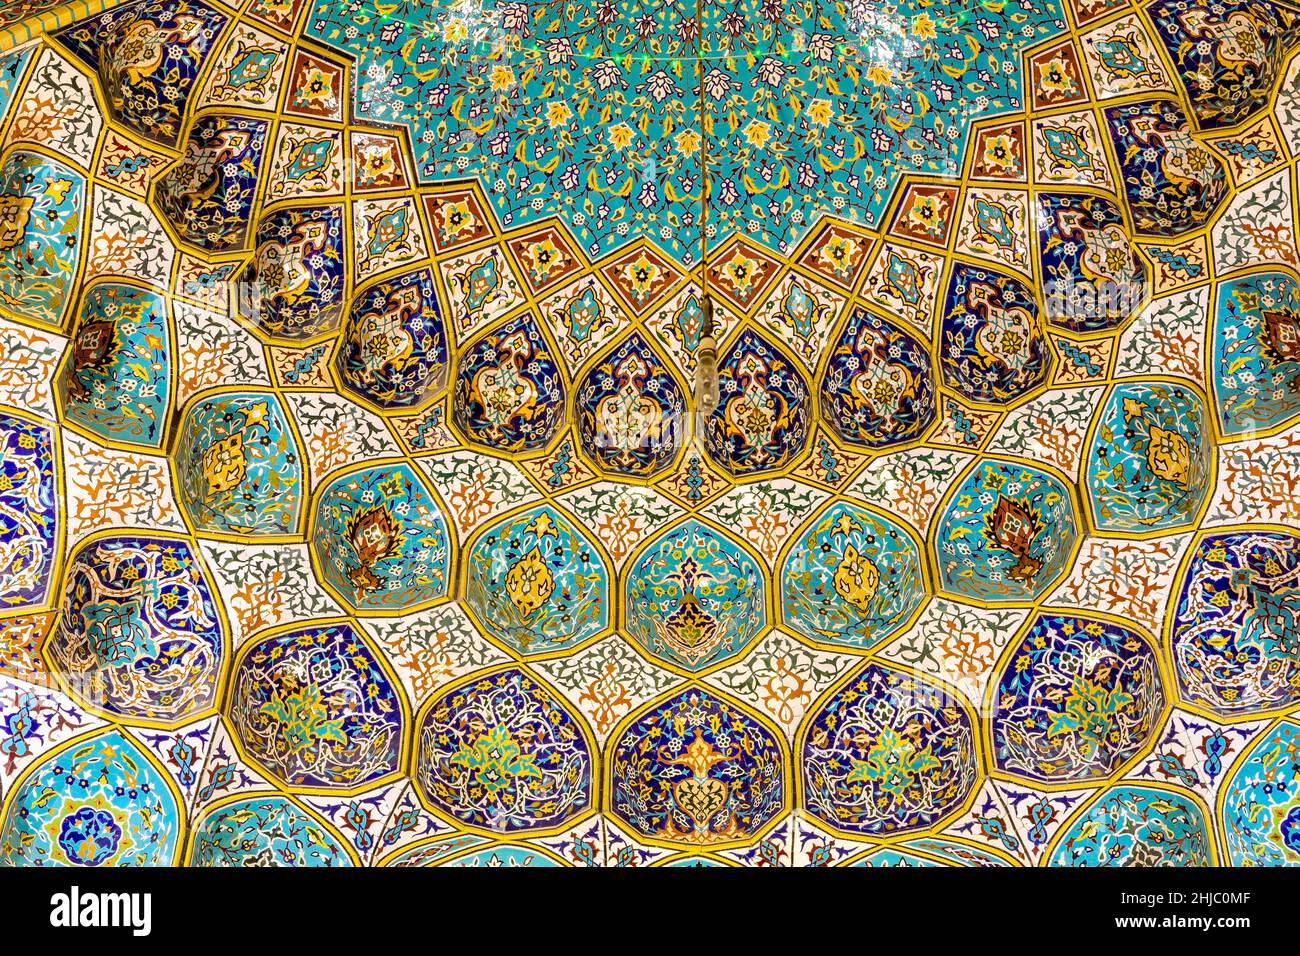 The Iranian Mosque (Imam Hussein Mosque) in Dubai colorful dome with  floral and geometric tiles patterns, example of Persian architecture. Stock Photo